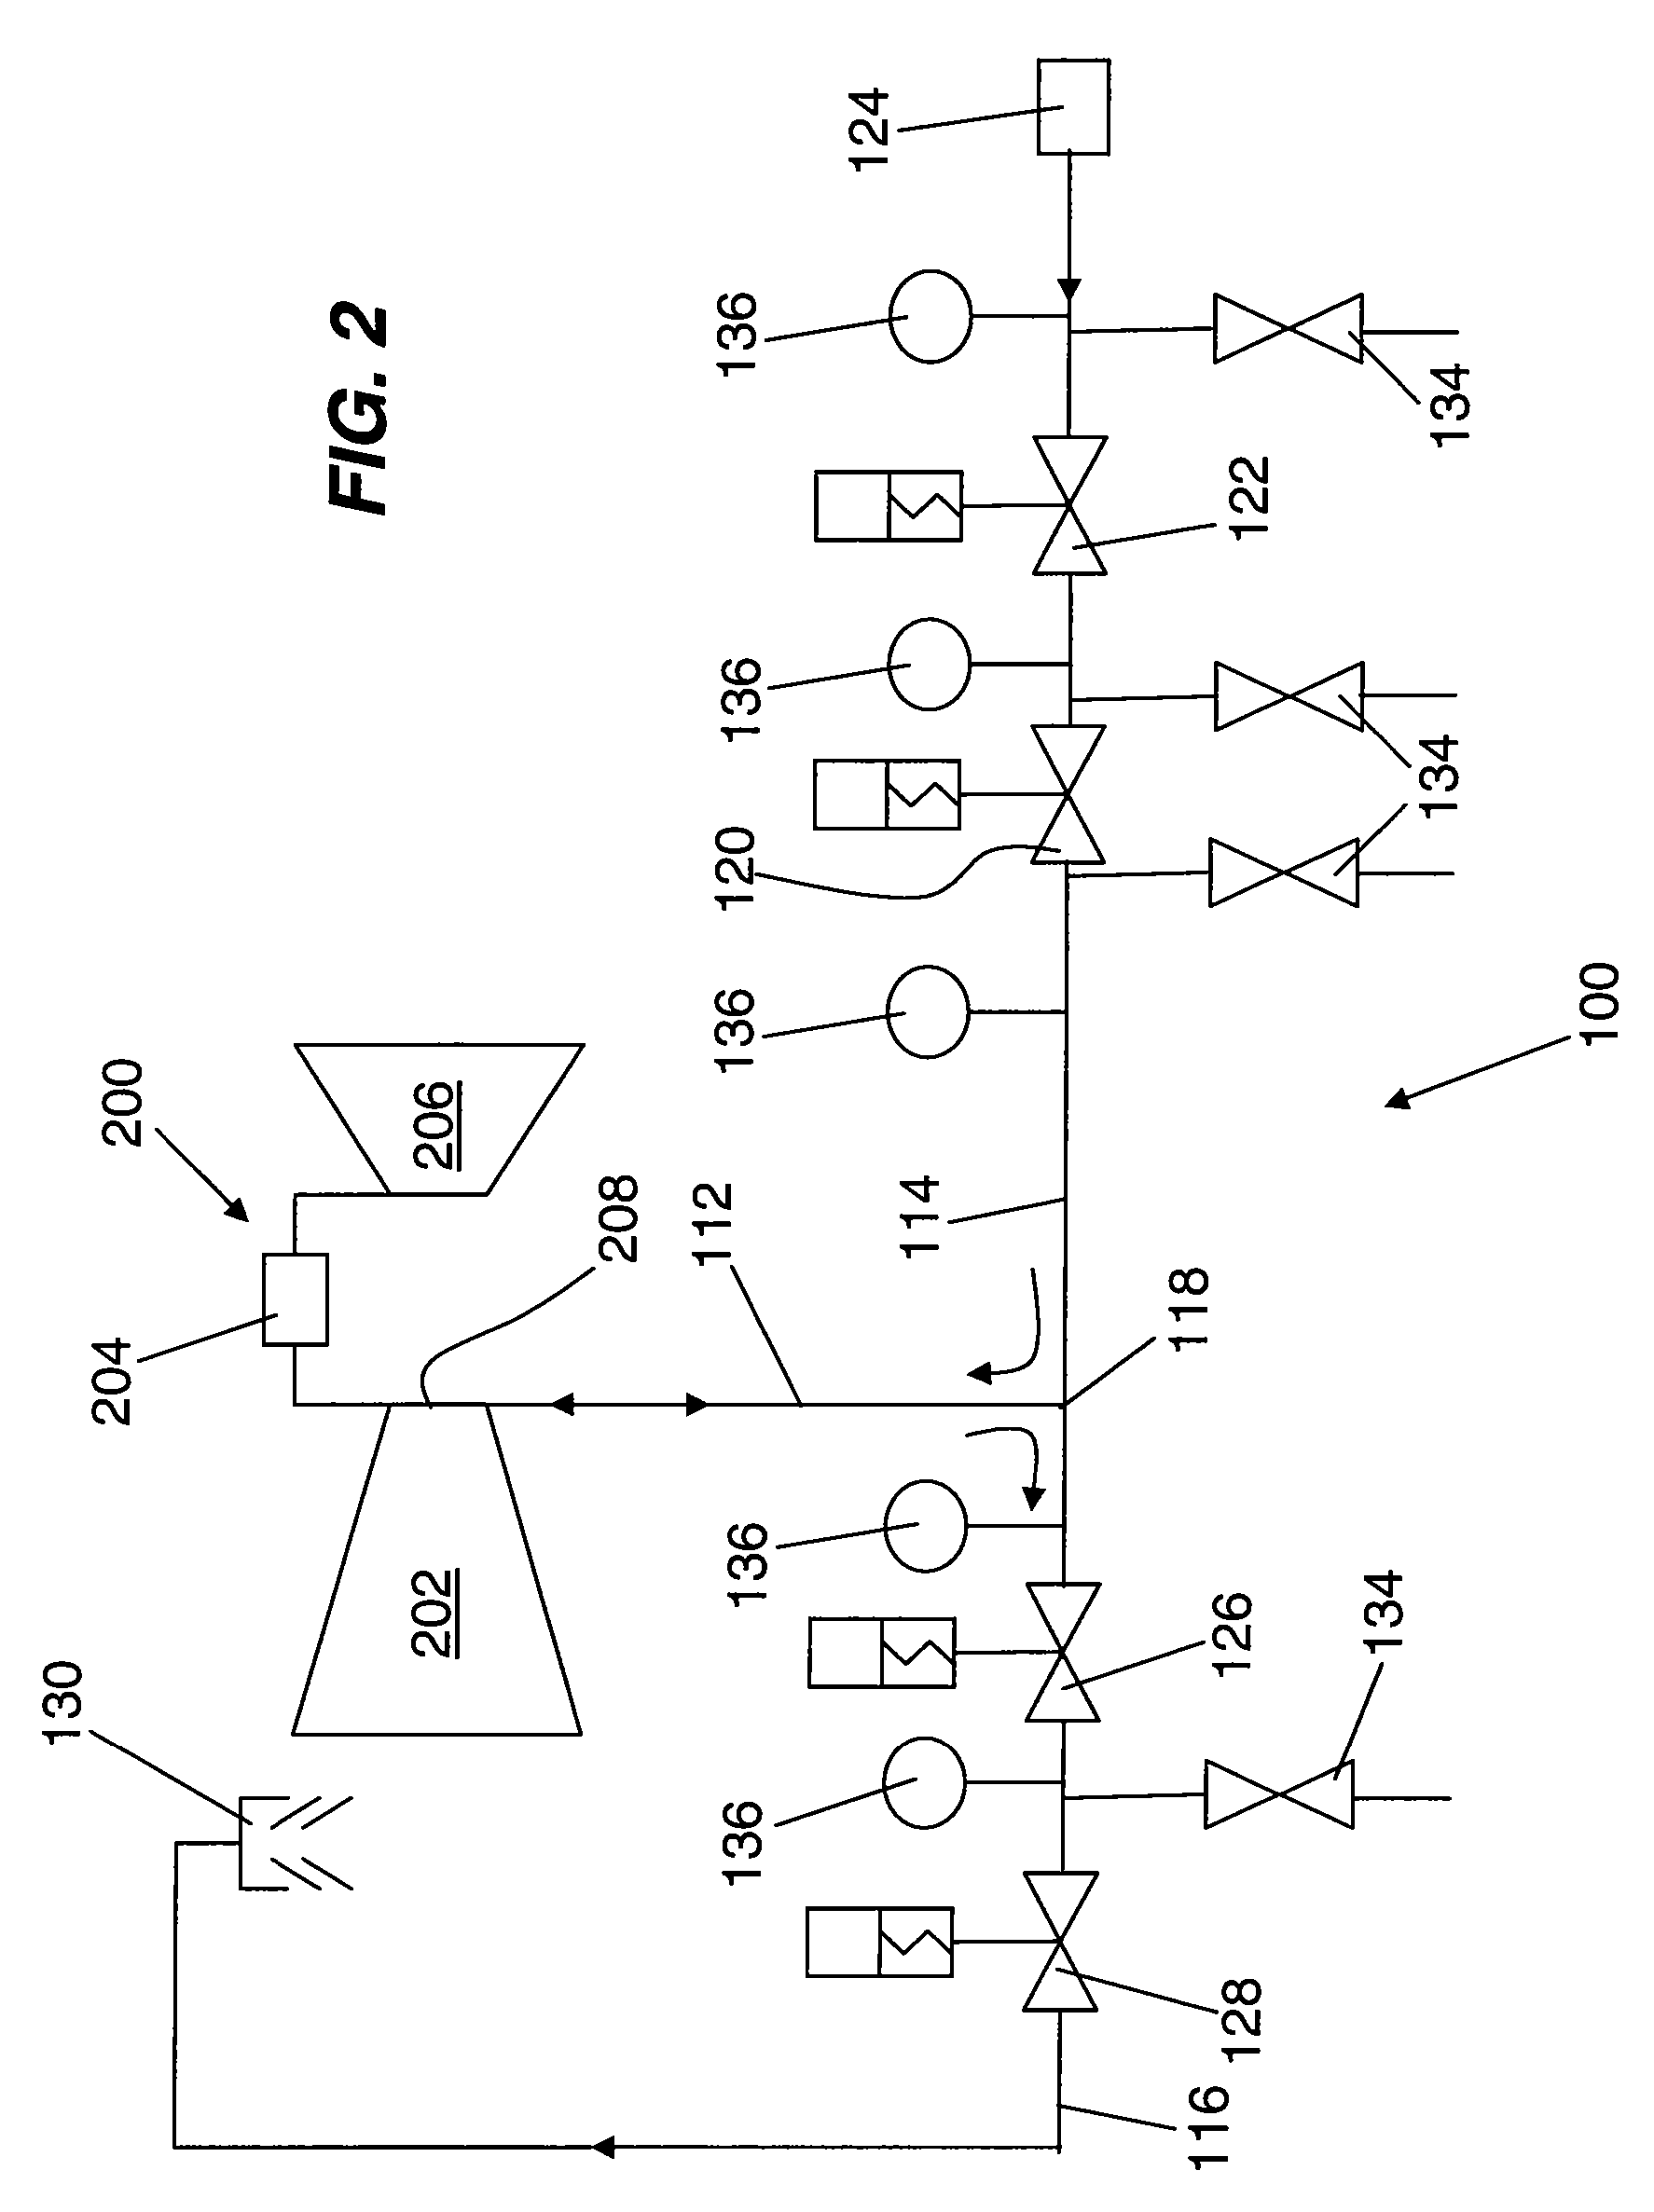 Inlet bleed heat and power augmentation for a gas turbine engine